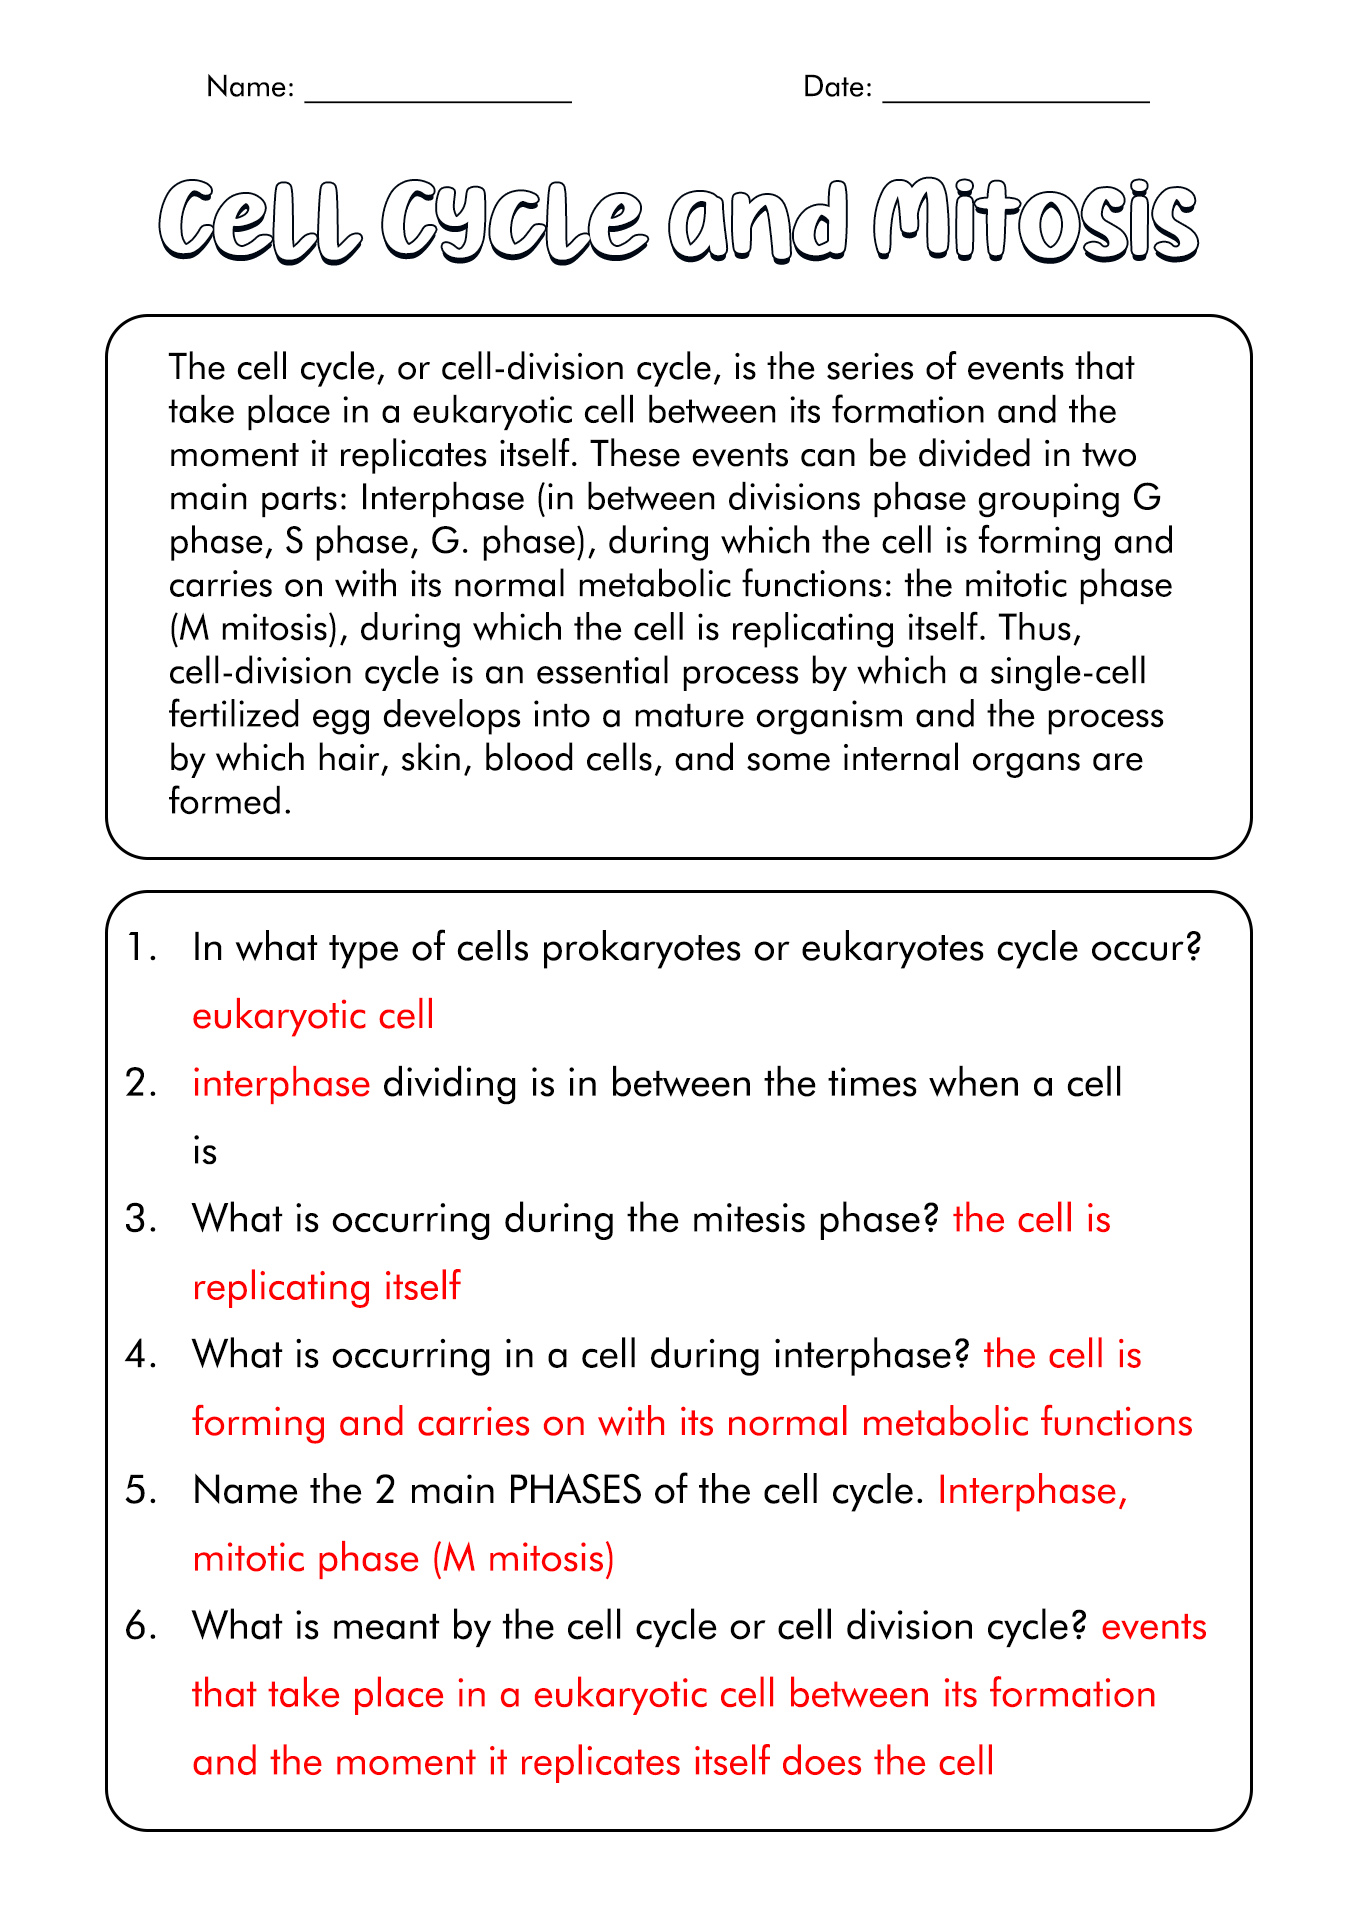 10-onion-cell-mitosis-worksheet-answers-quizlet-worksheets-decoomo